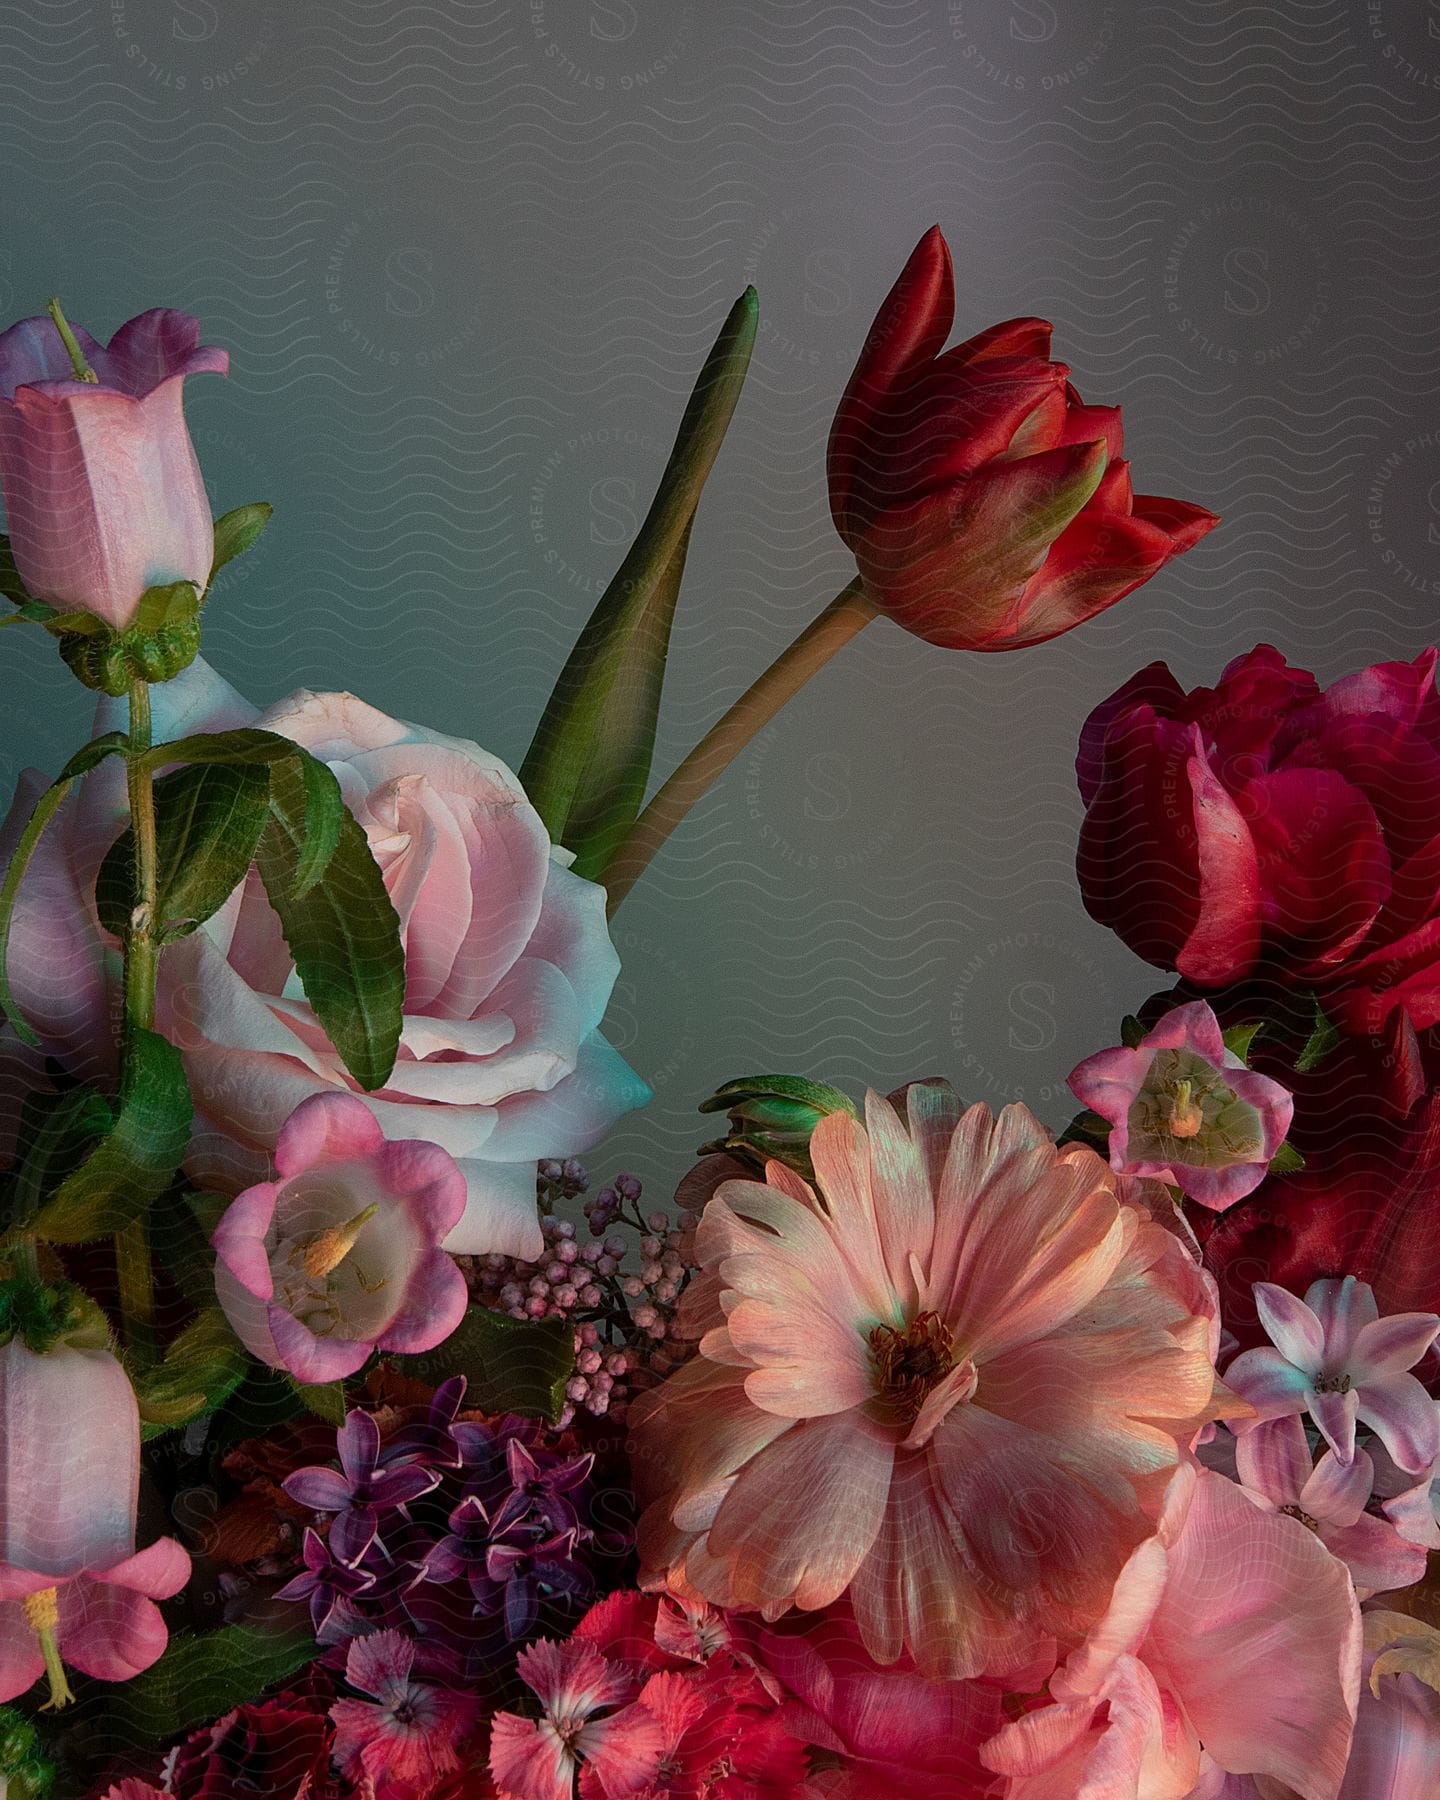 Close-up of a bouquet of pink roses, red tulips and other flowers.